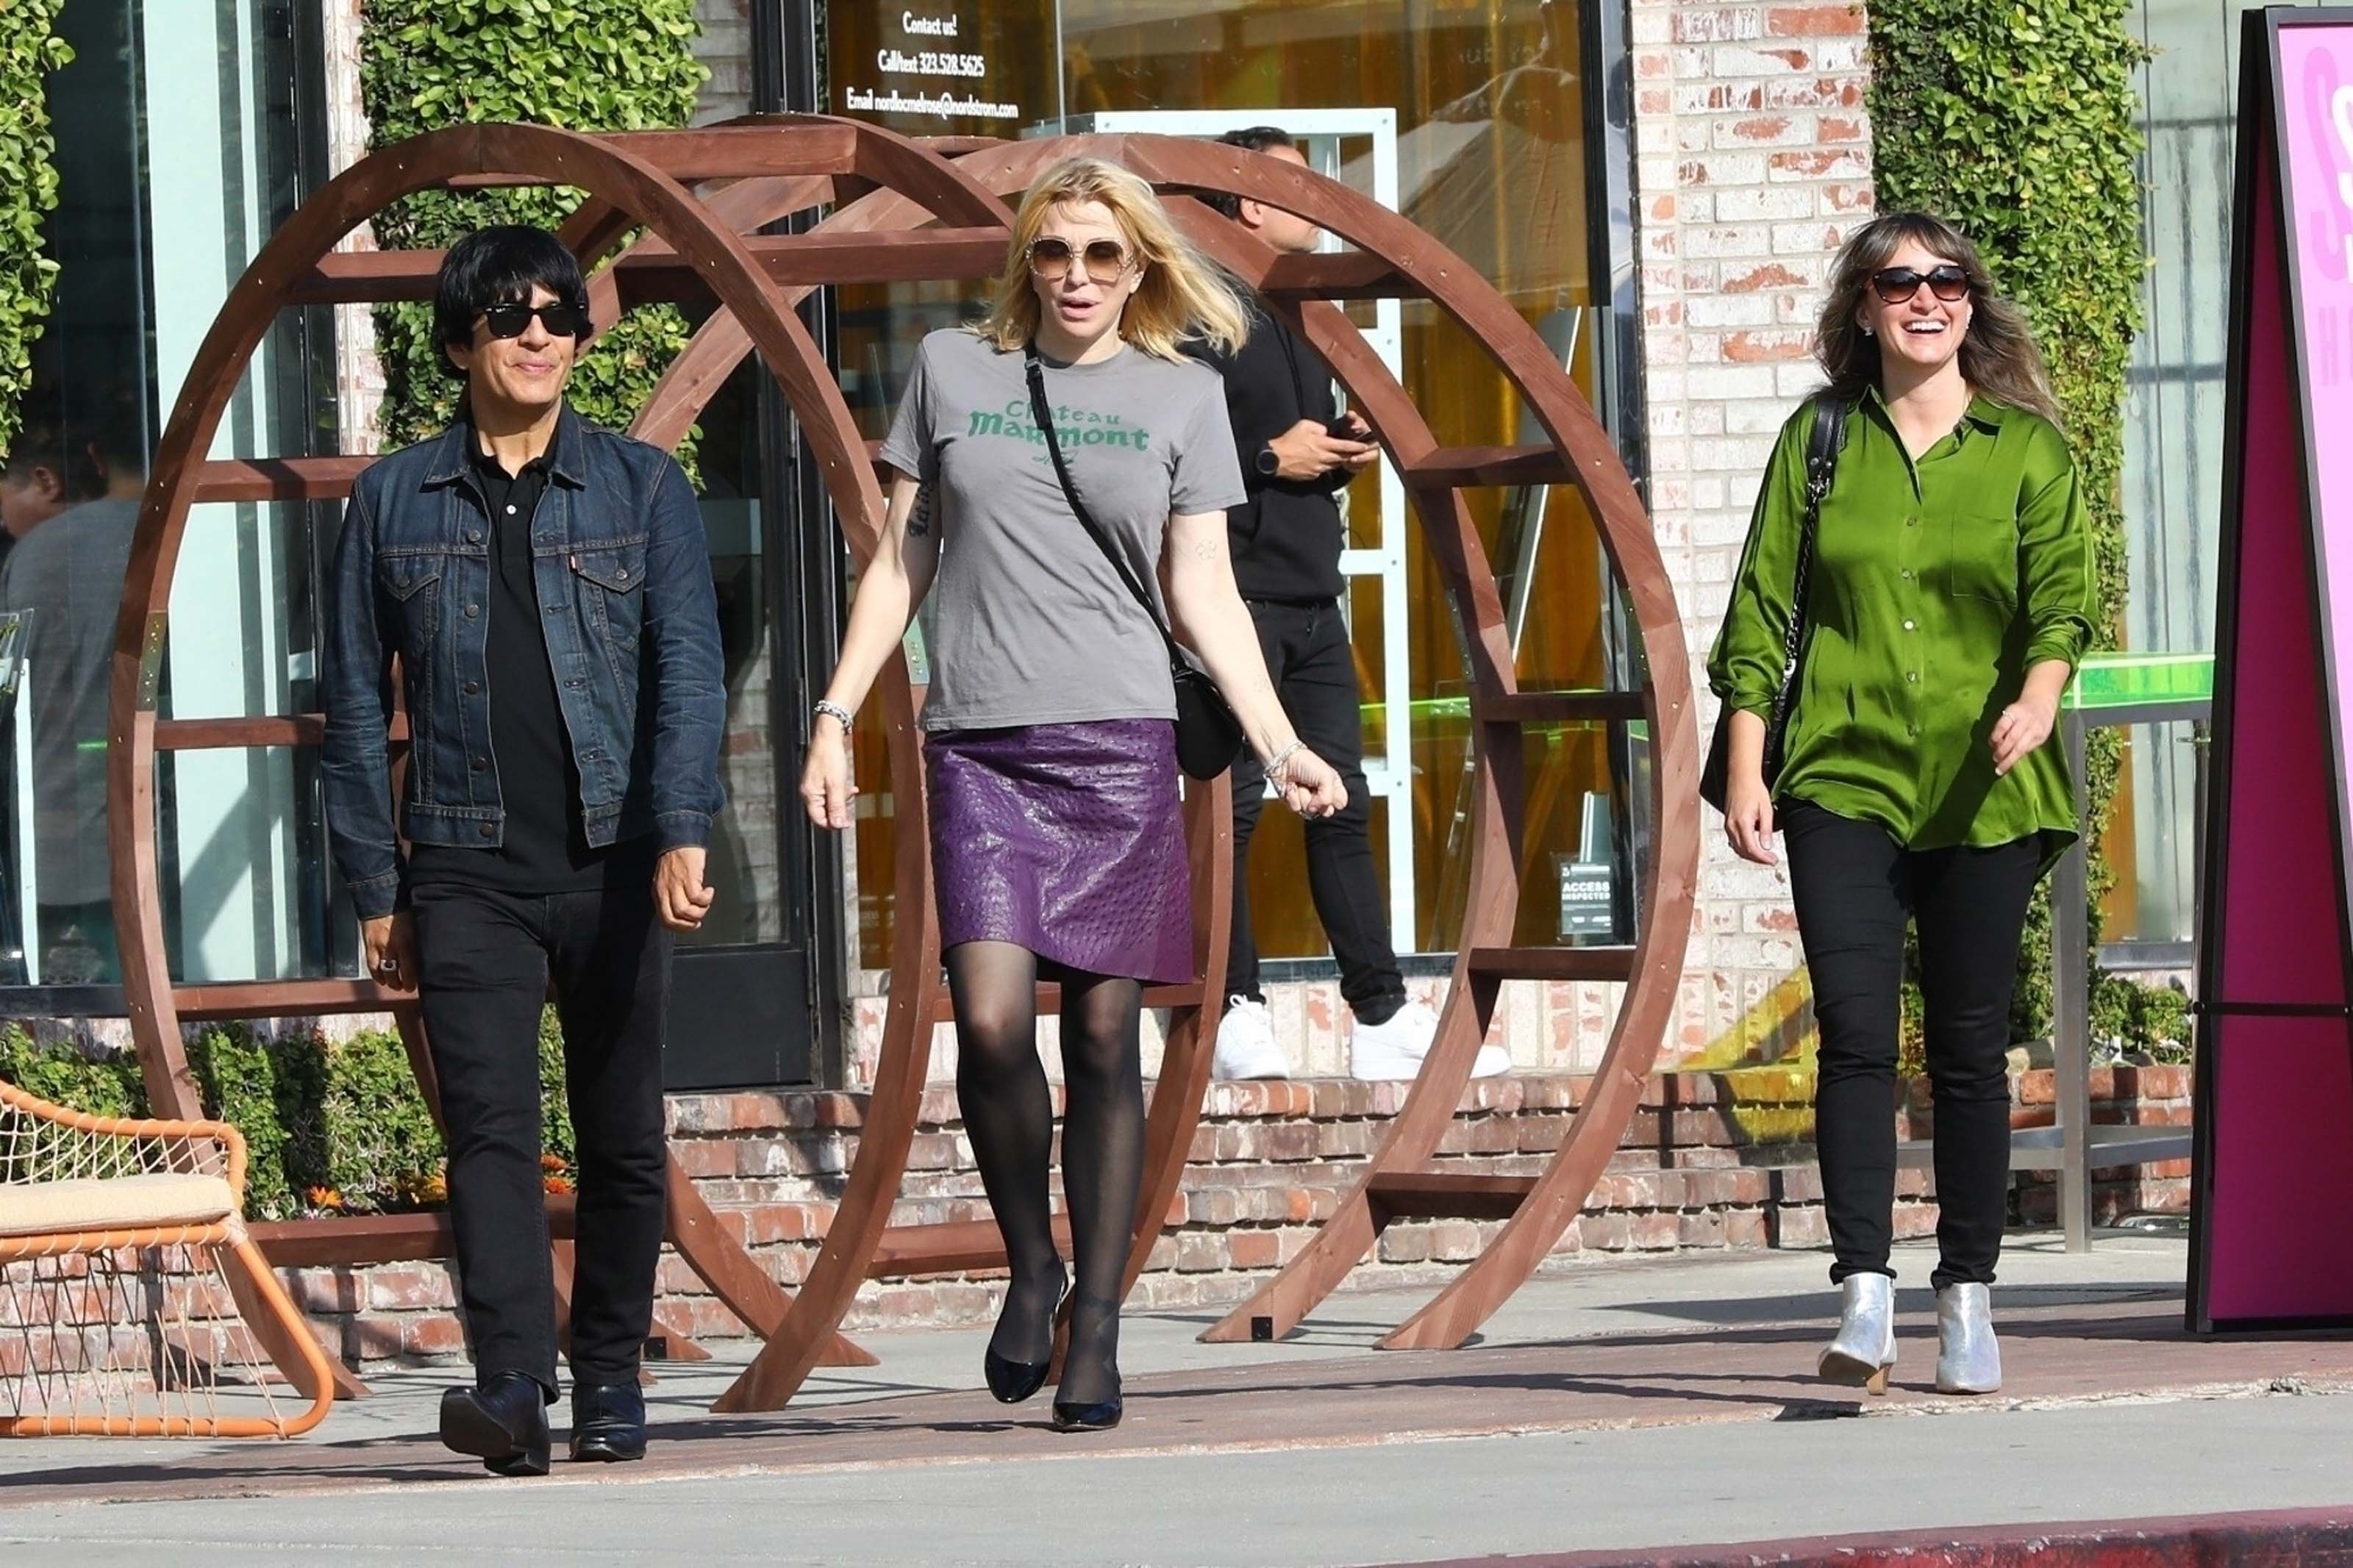 Courtney Love enjoys some retail therapy ahead of the weekend